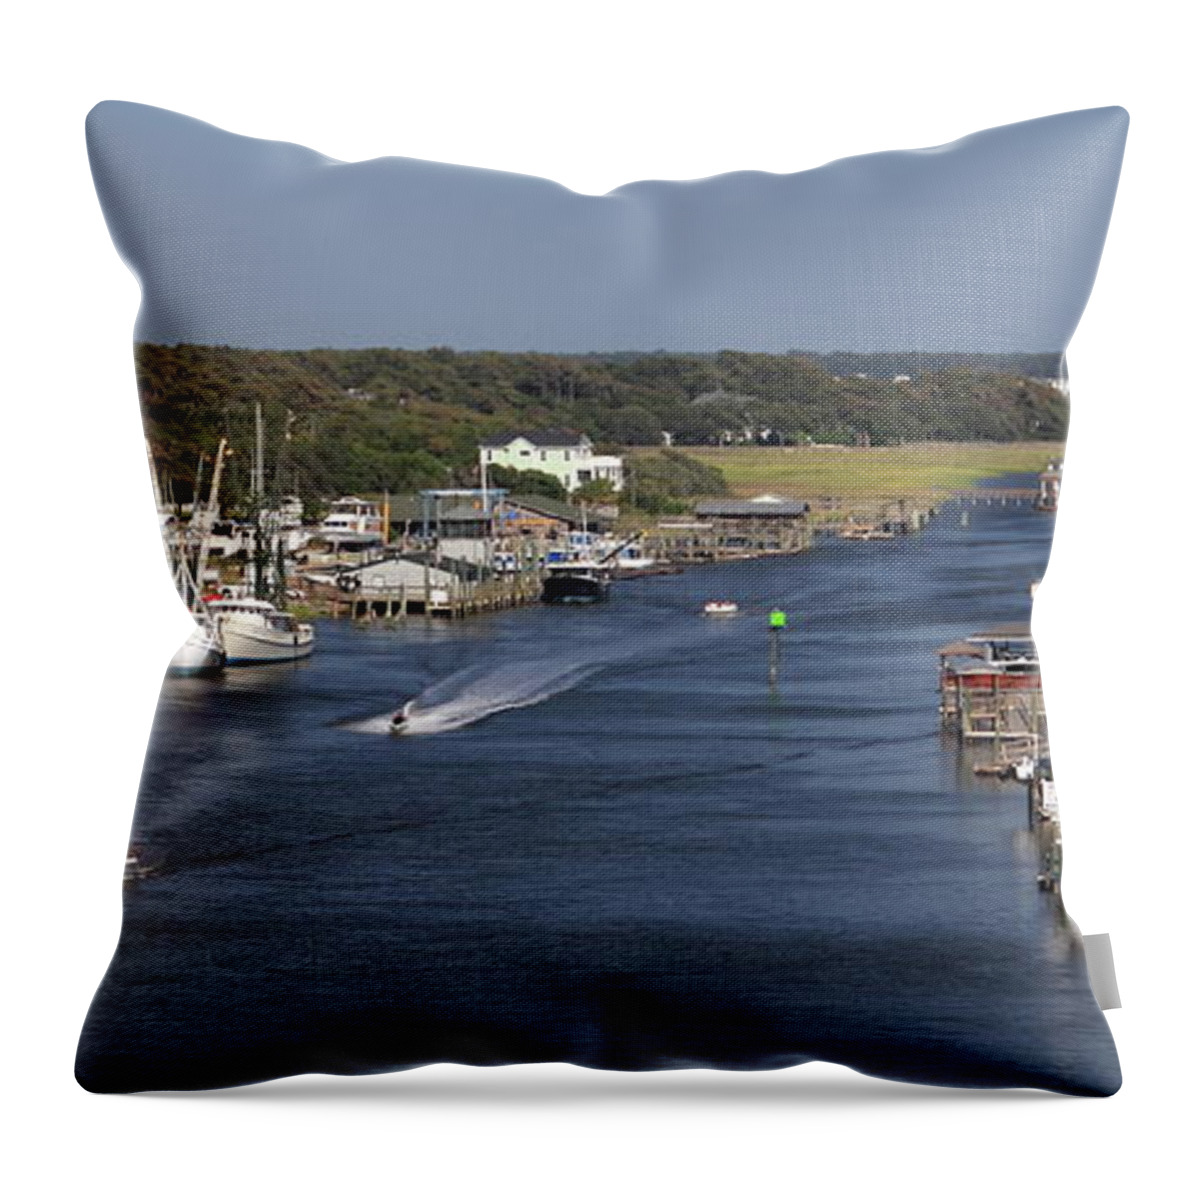 Intracoastal Waterway Throw Pillow featuring the photograph Intracoastal Waterway by Dave Guy